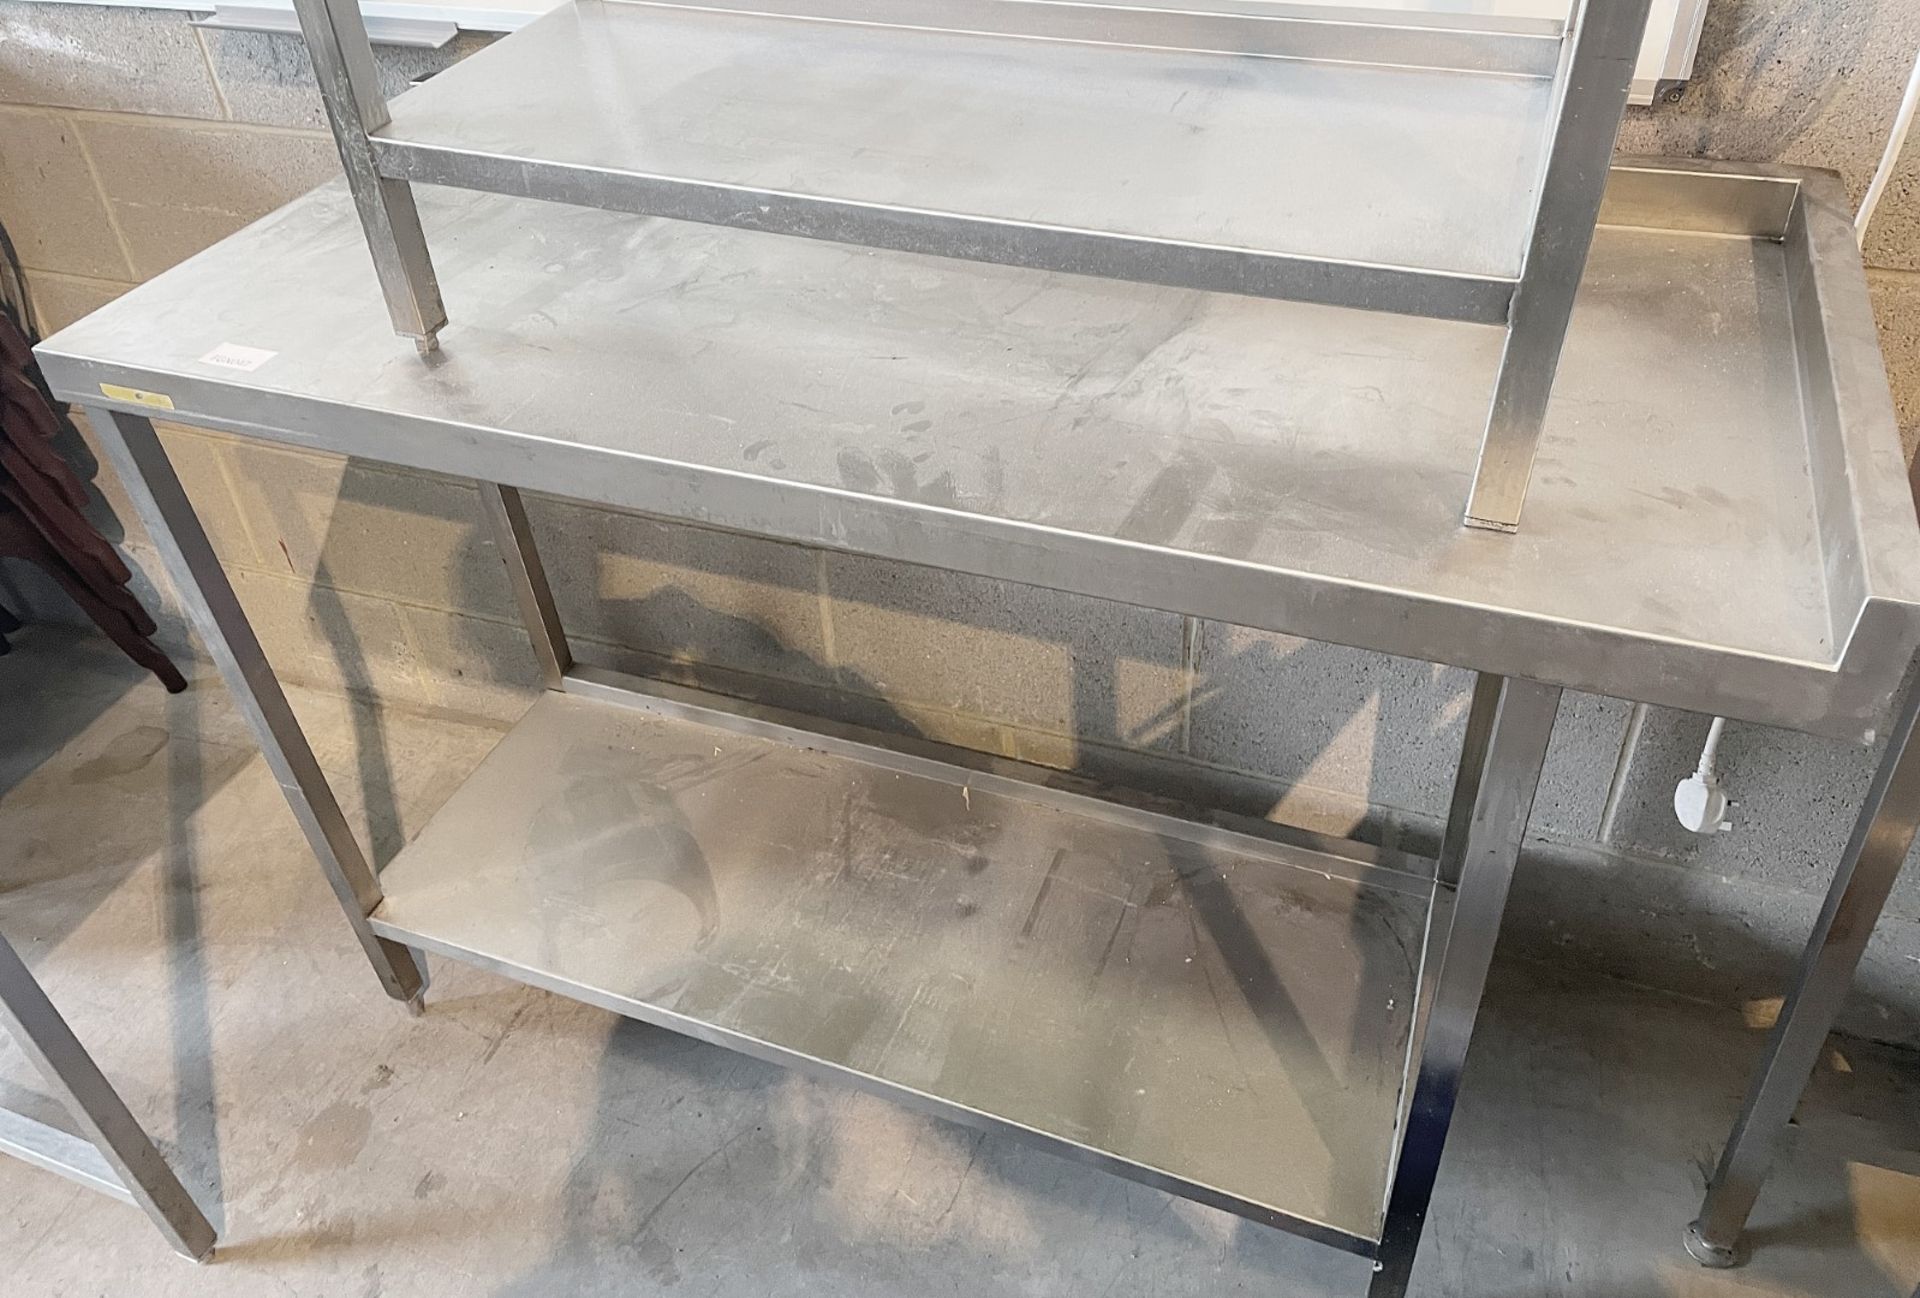 1 x Stainless Steel Prep Table, With Upstand and Undershelf - Approx 130 x 53 x 92Cm - Ref: FGN047 - - Image 2 of 3